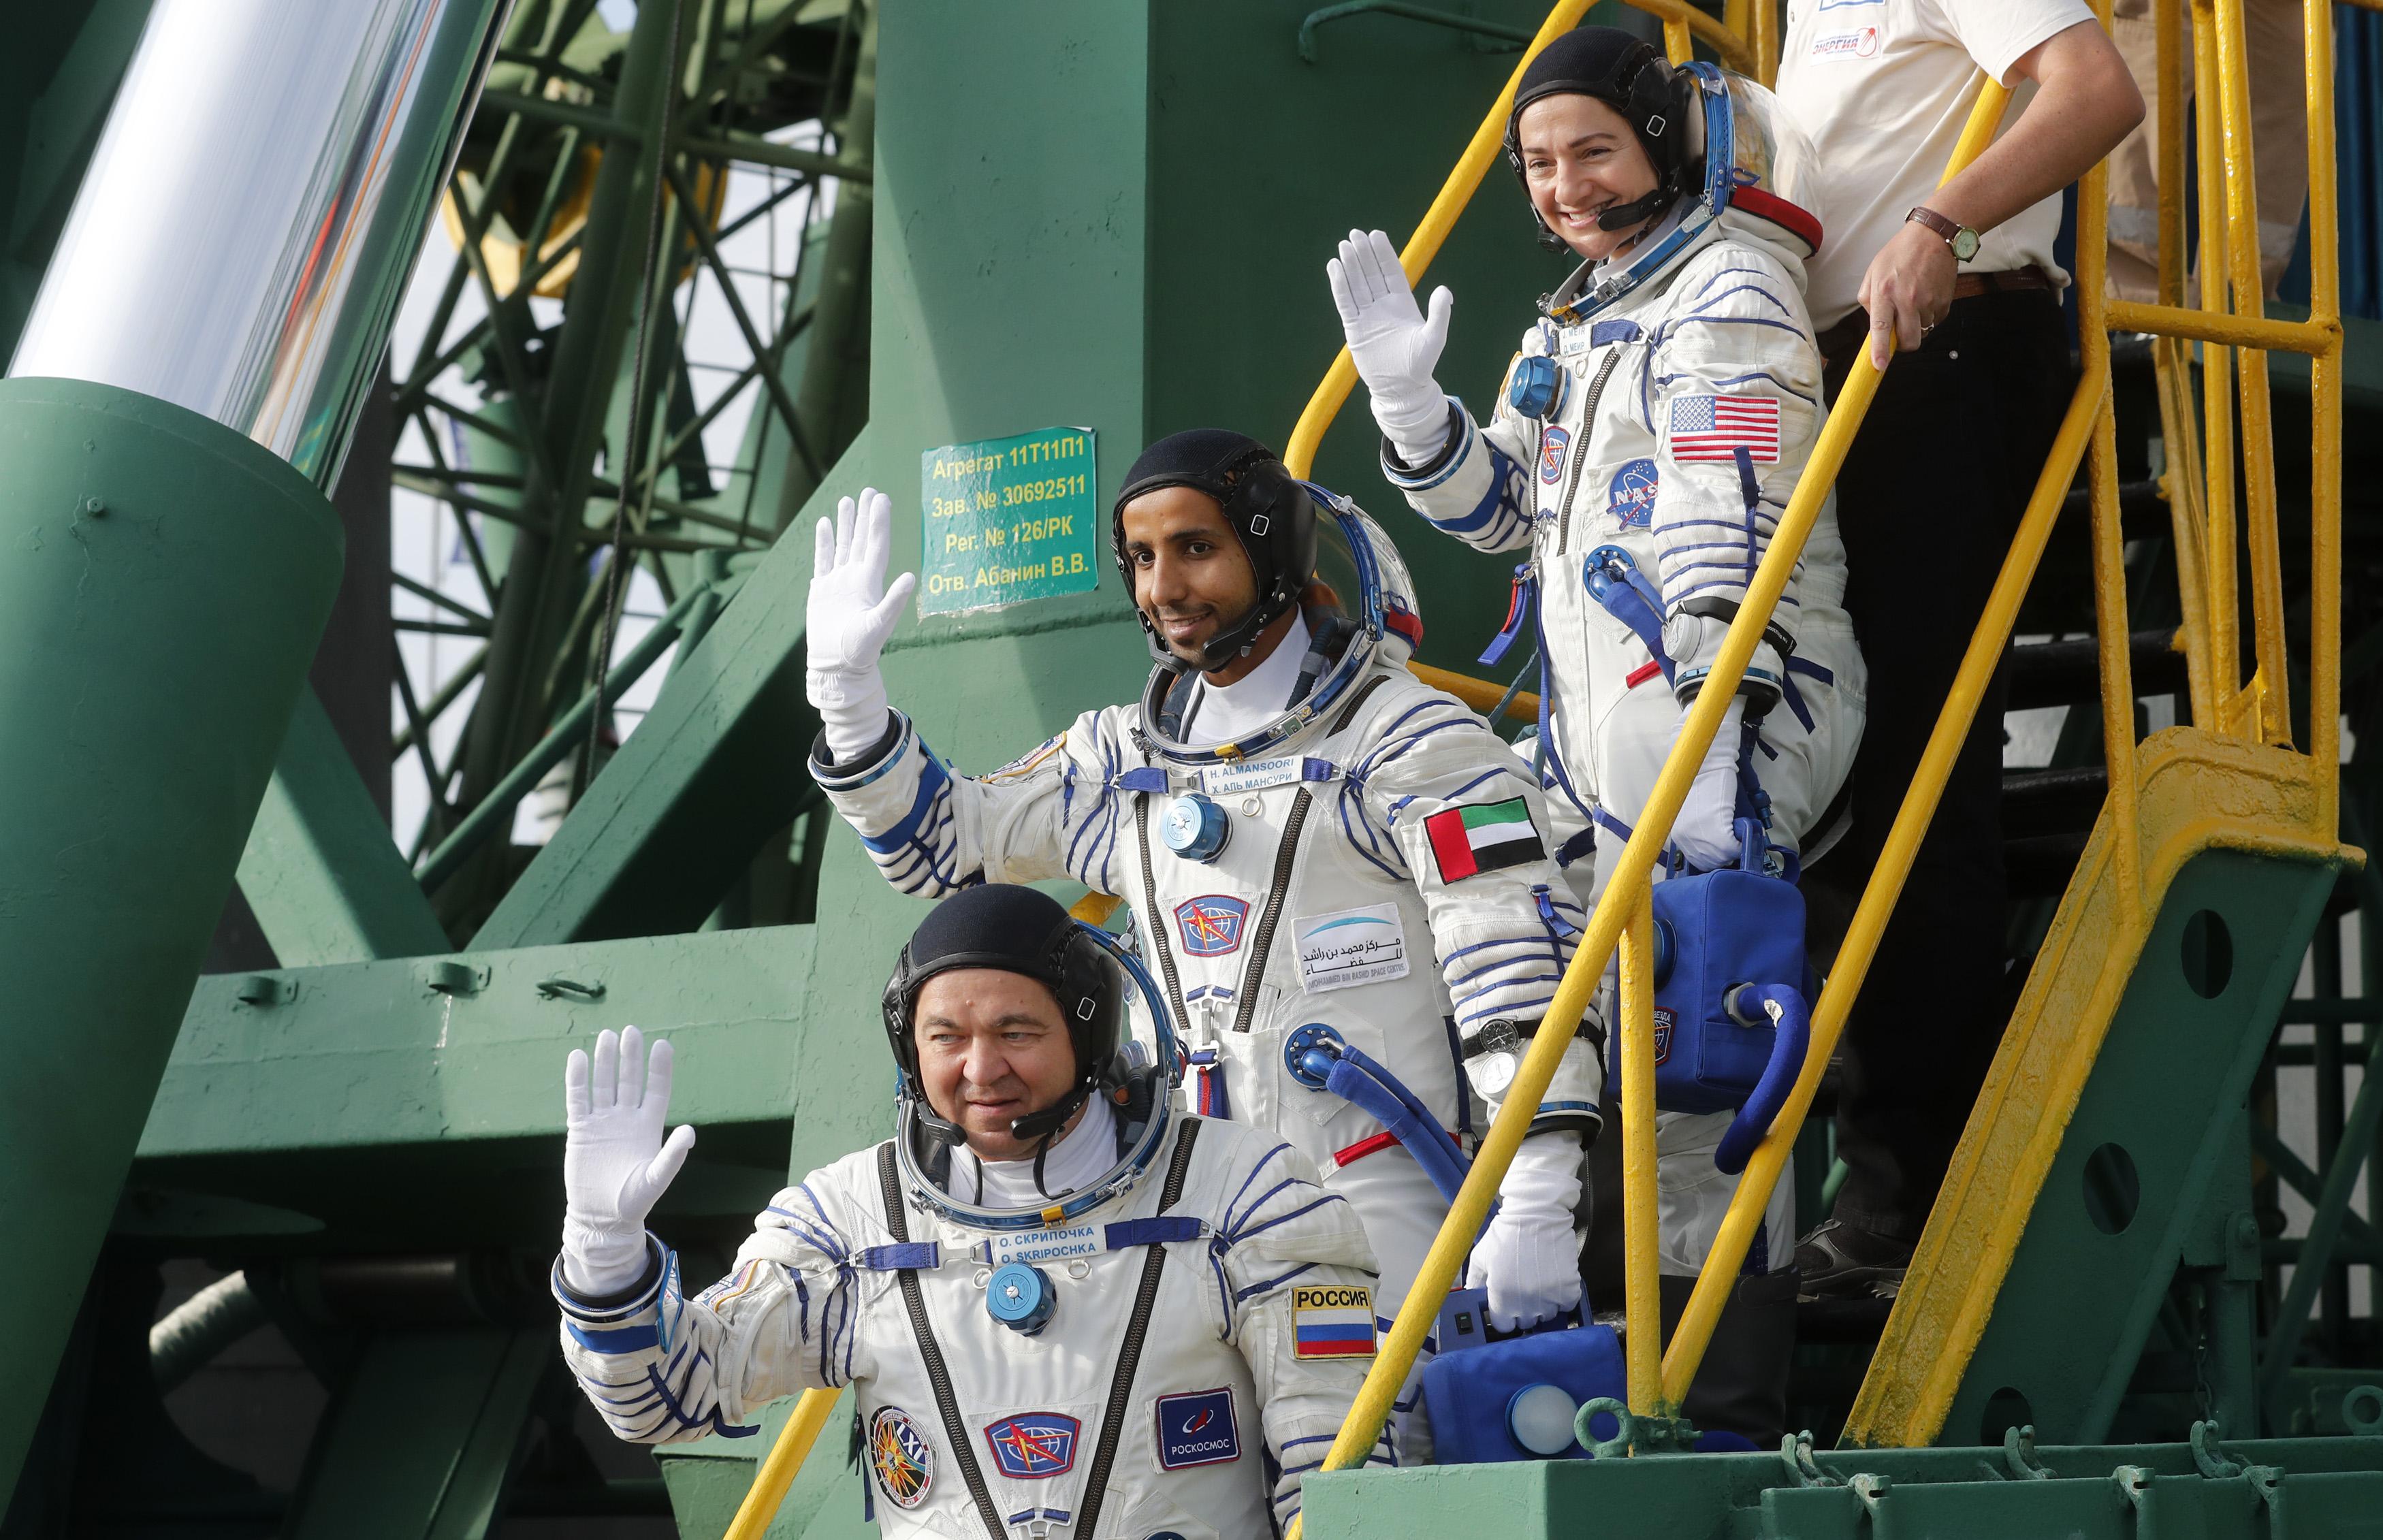 Three astronauts walk down stairs, dressed in space suits with the Russian, U.S. and UAE flags on their sleeves. Behind and surrounding them is a metal structure for a rocket launch. 